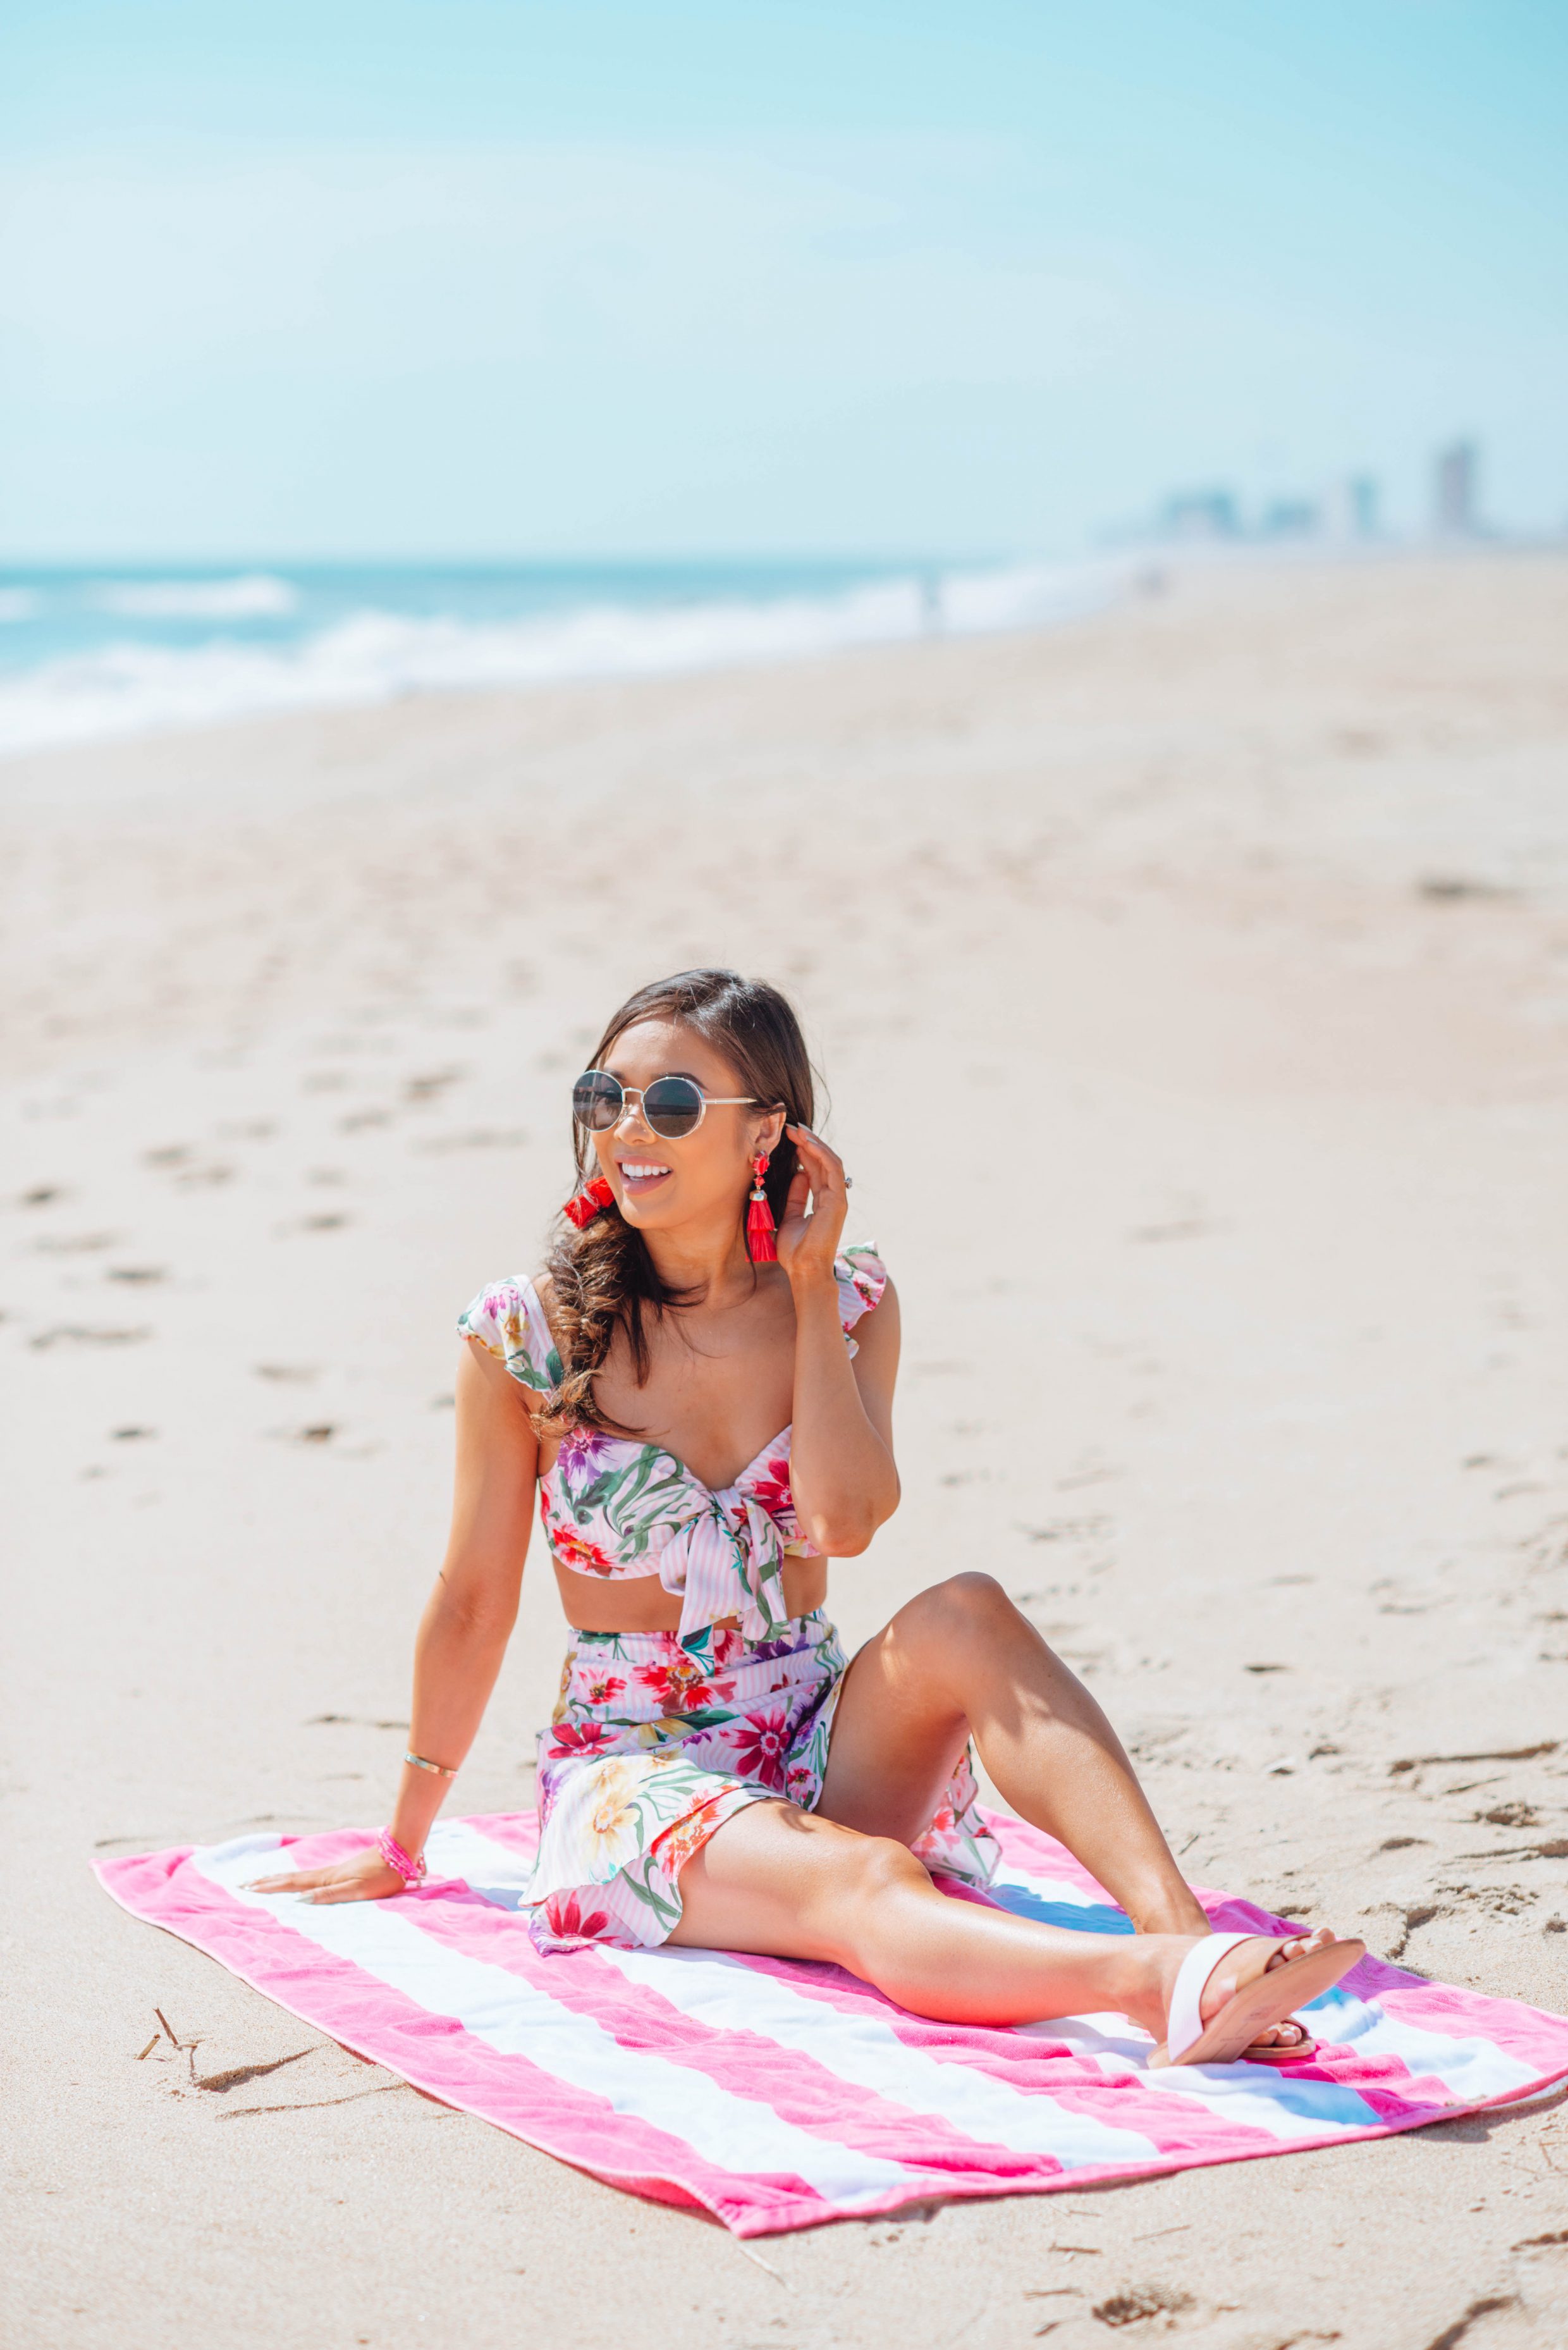 Floral two piece set with tassel earrings and a fishtail braid for the beach